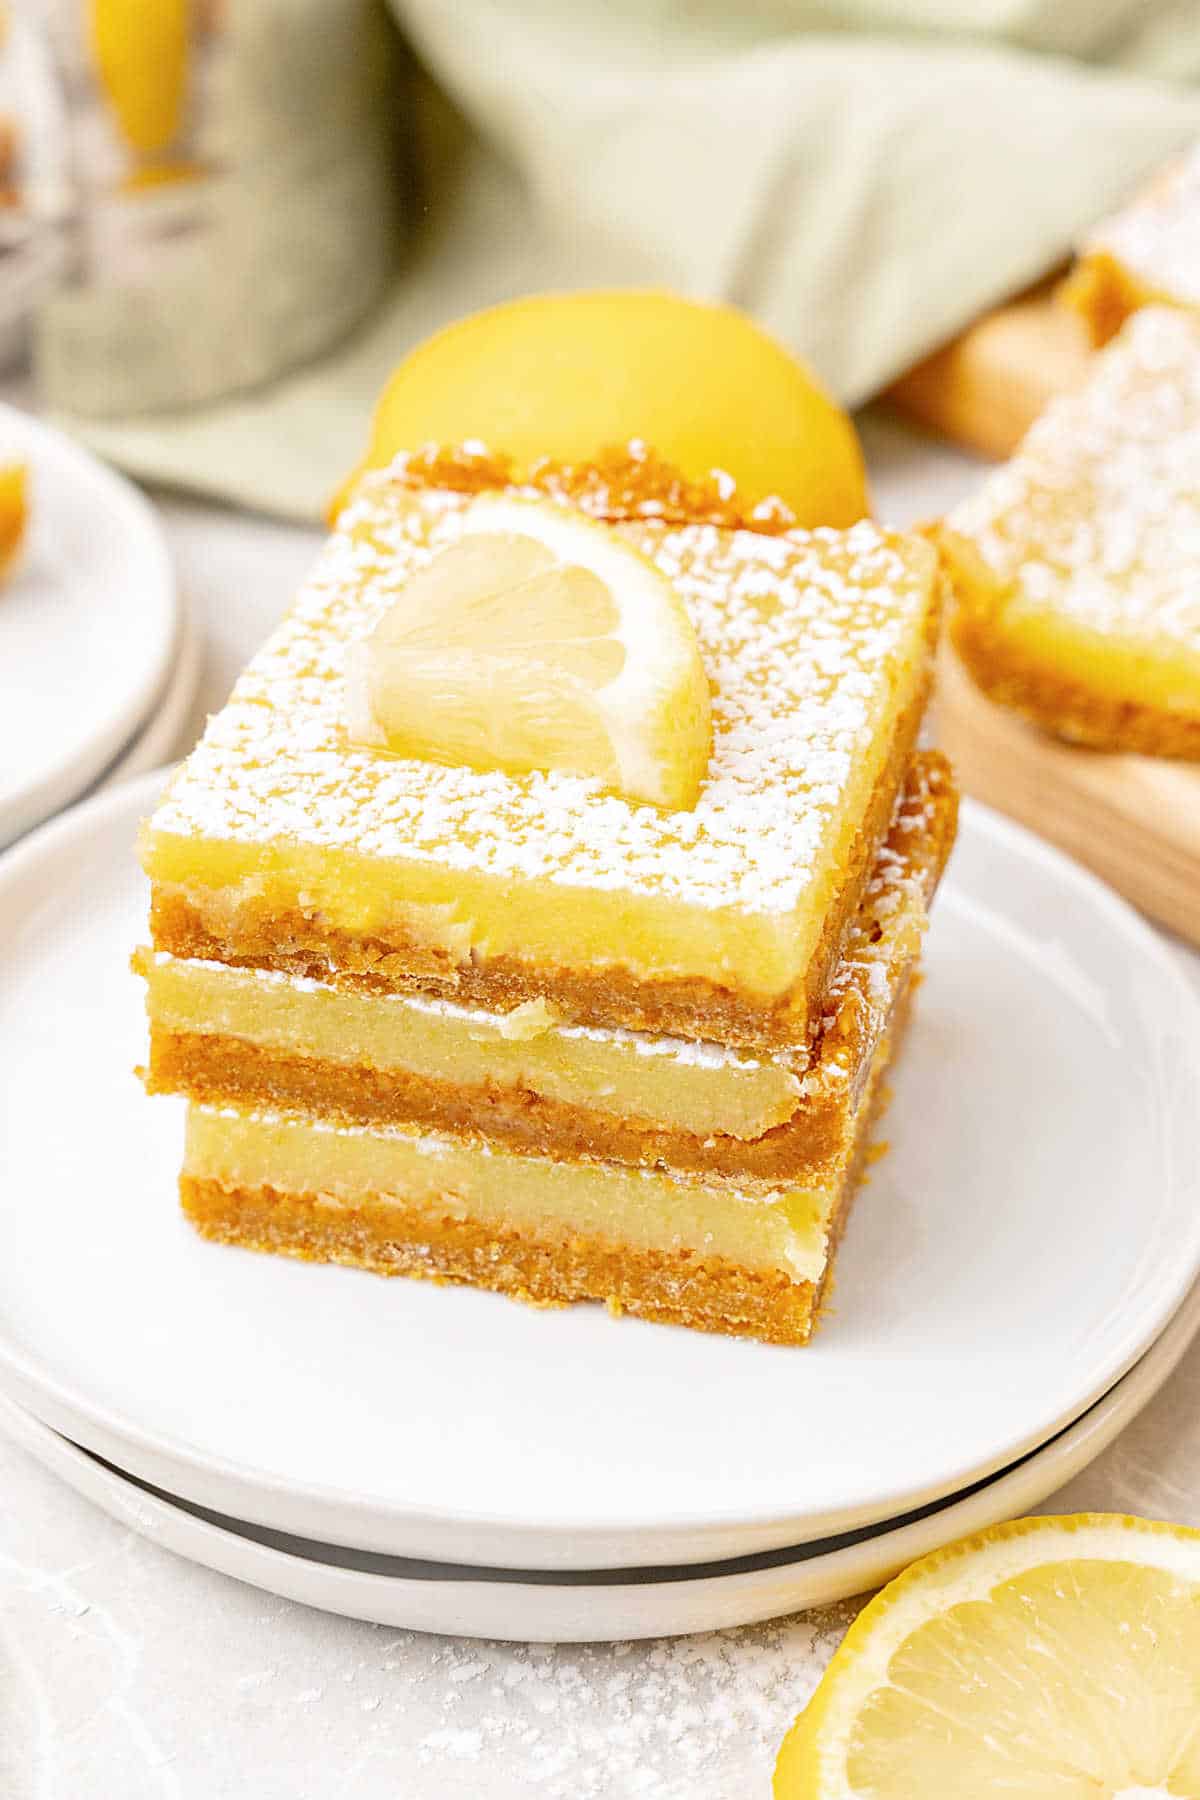 Three lemon bars on a stack of white plates. White surface with lemon slices, metal cup, green cloth.